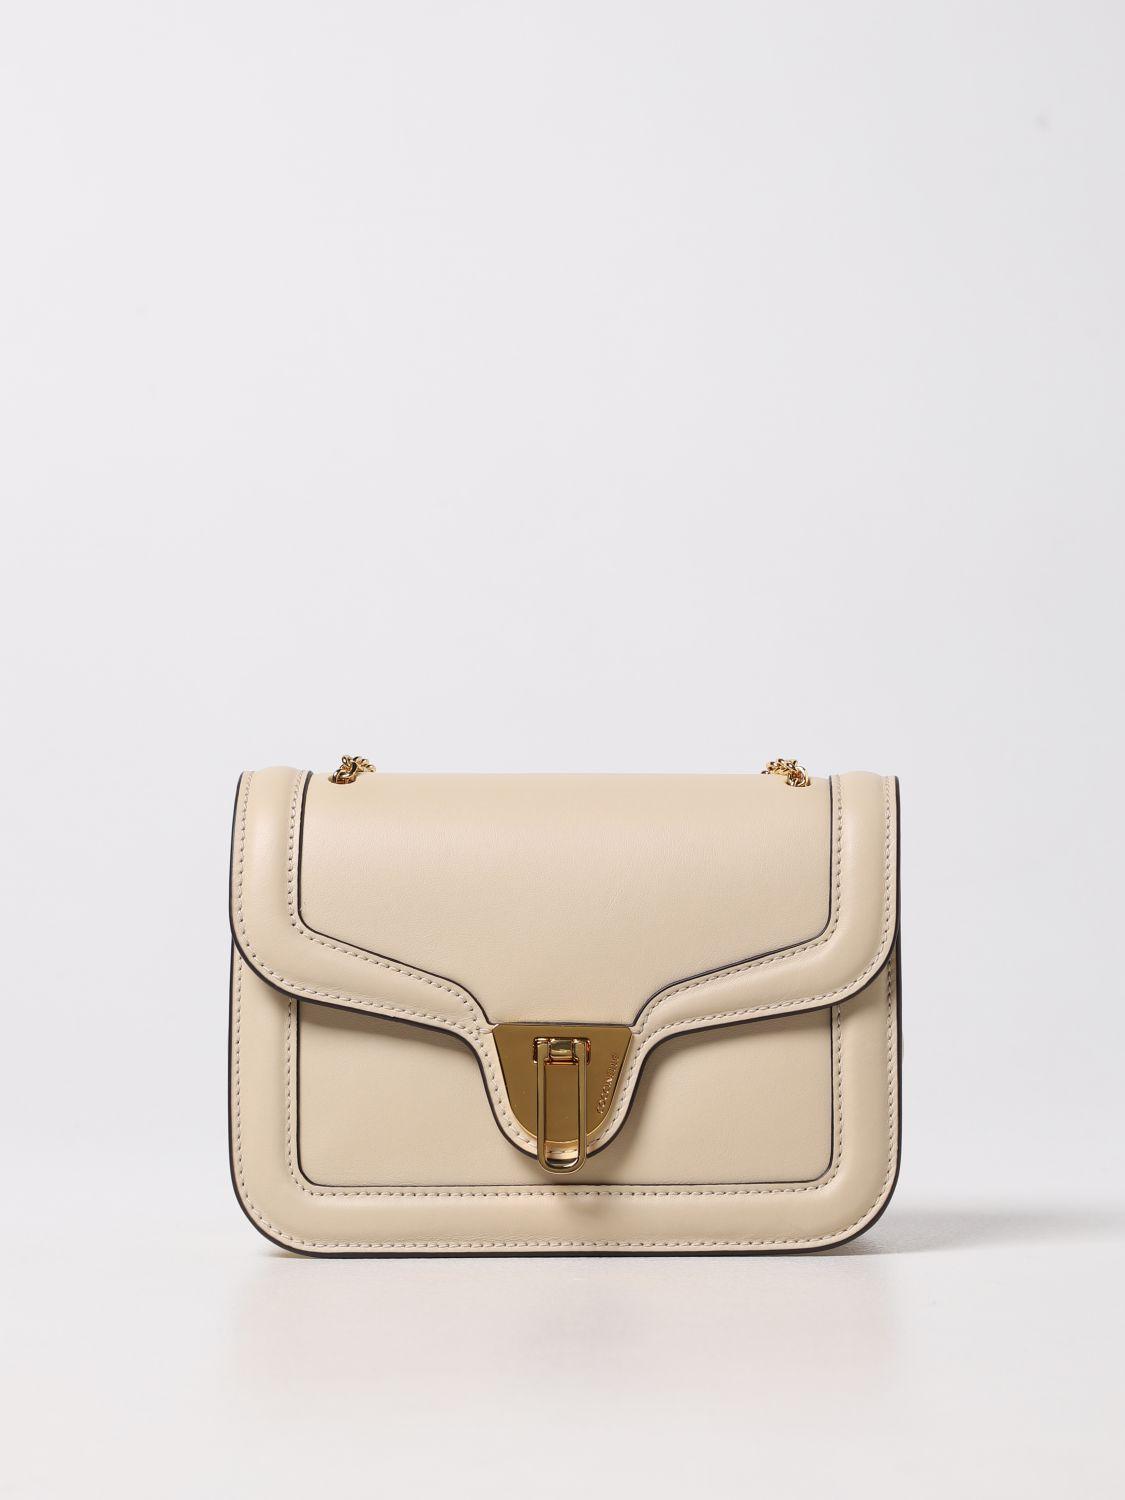 Coccinelle Bag In Smooth Leather in White | Lyst